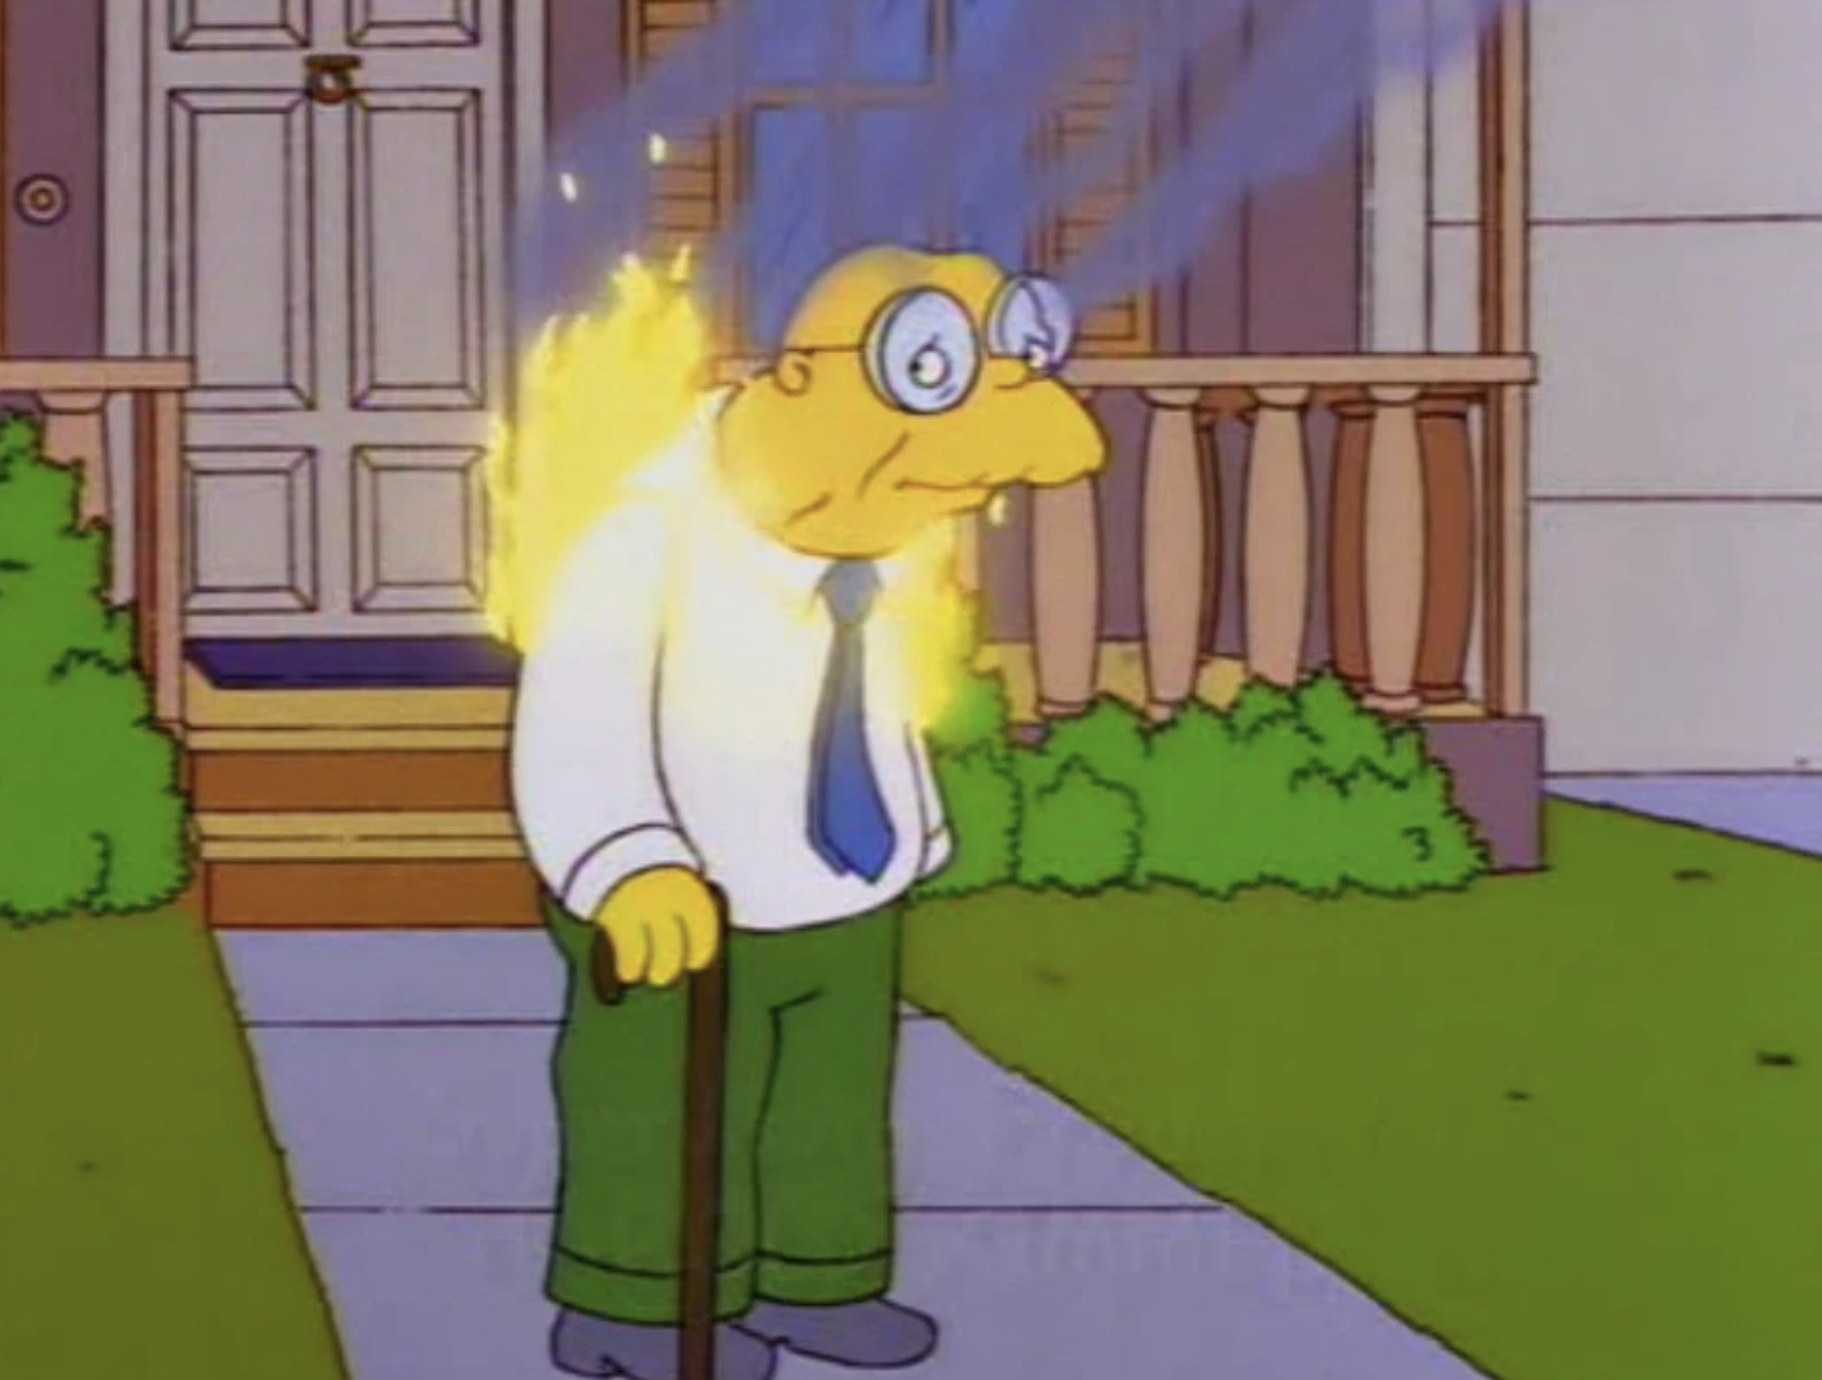 Hans Moleman stands in front of a house, and he&#x27;s on fire